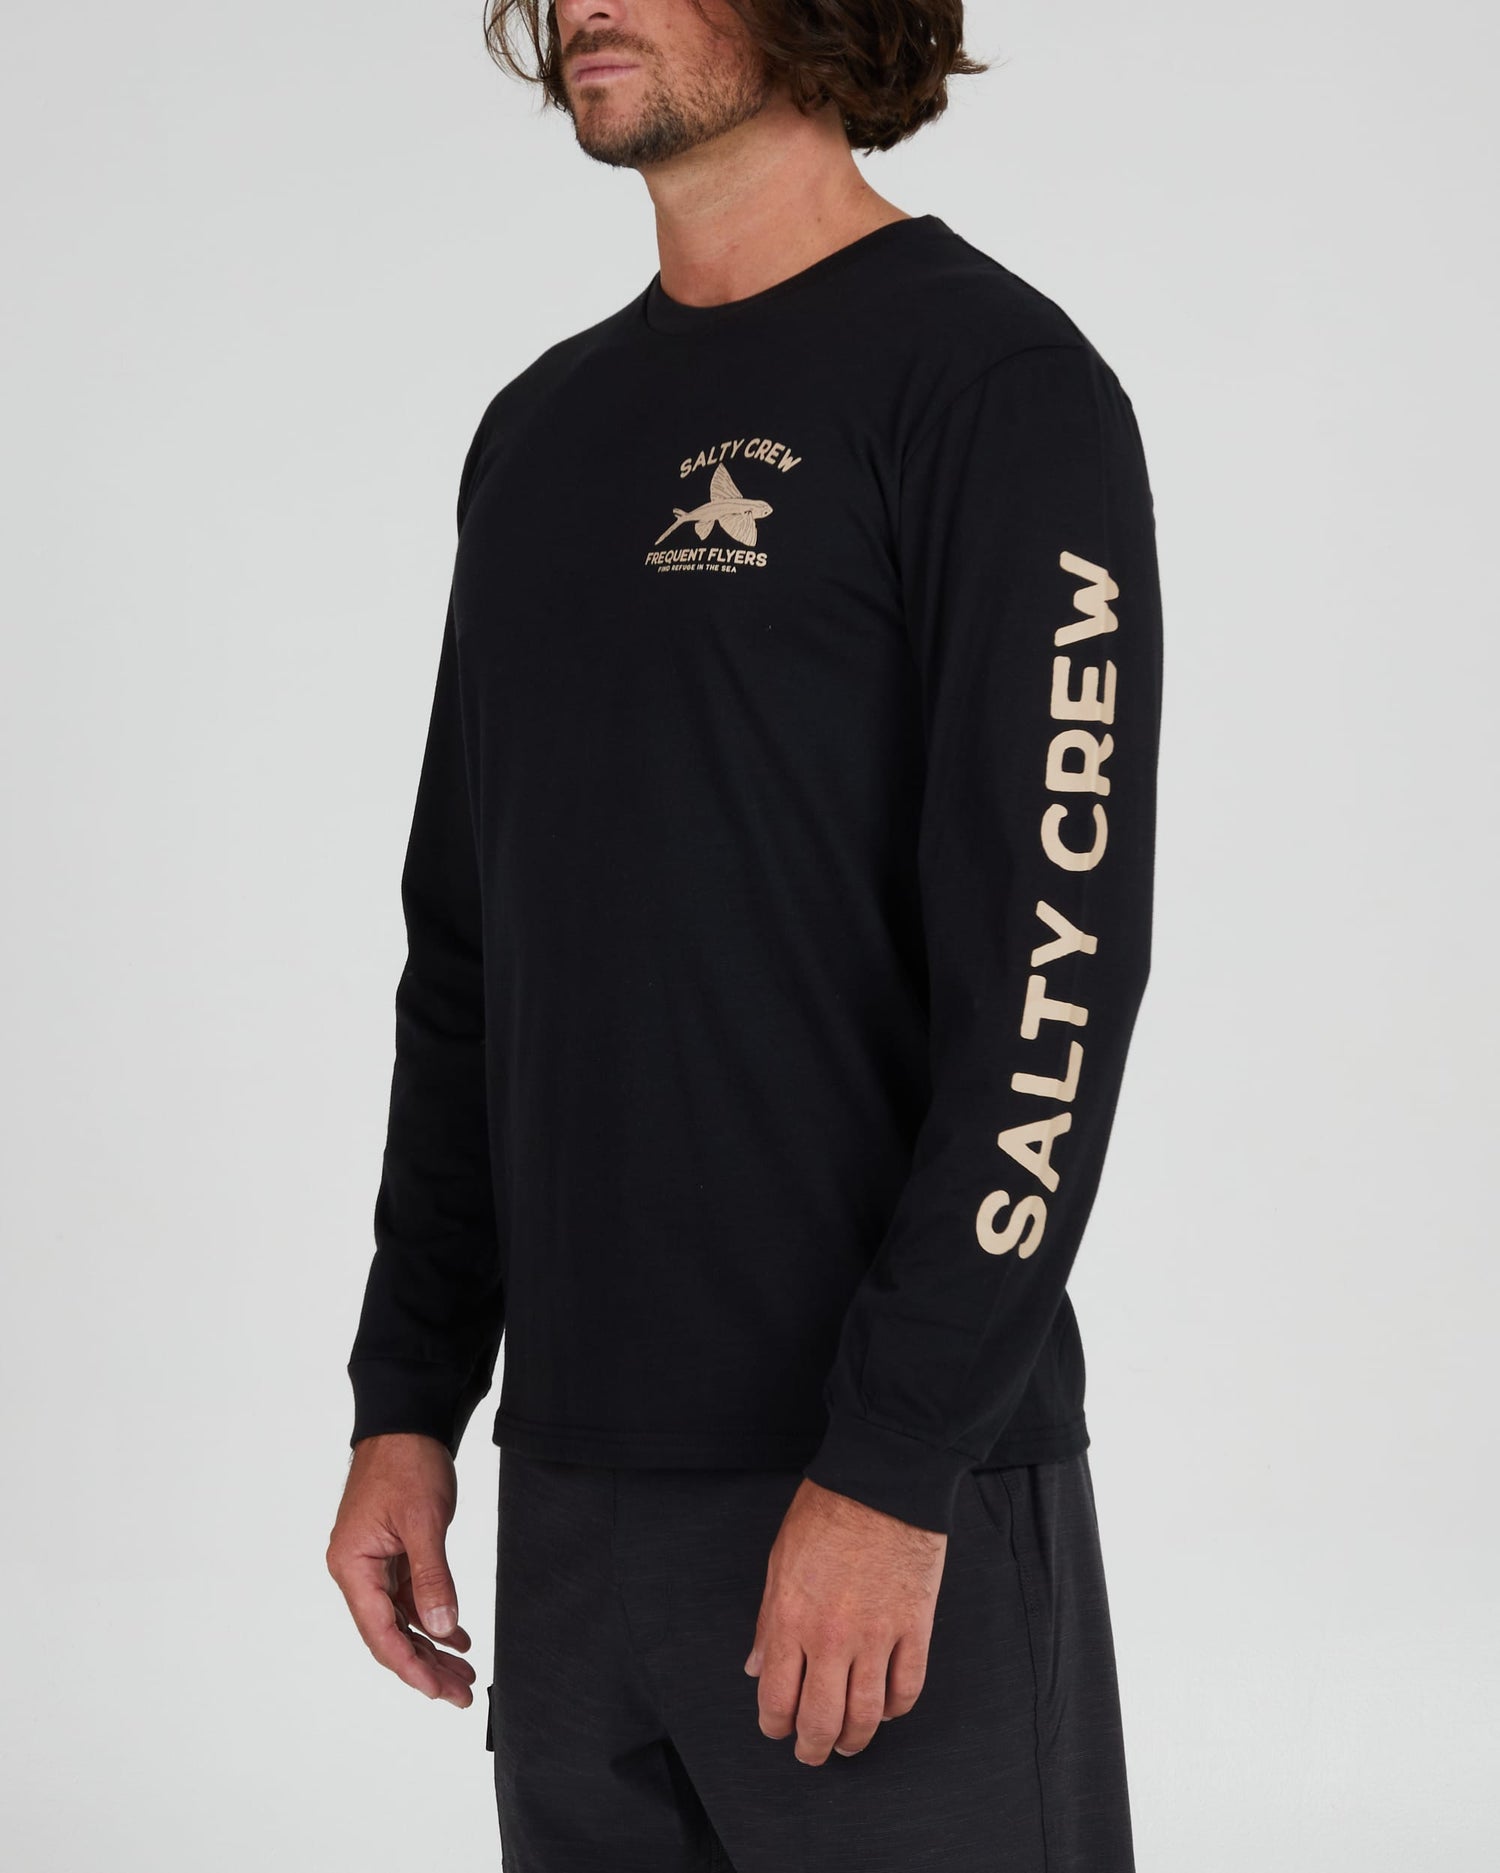 Salty crew T-SHIRTS L/S FREQUENT FLYER PREM L/S TEE  - Black in Black